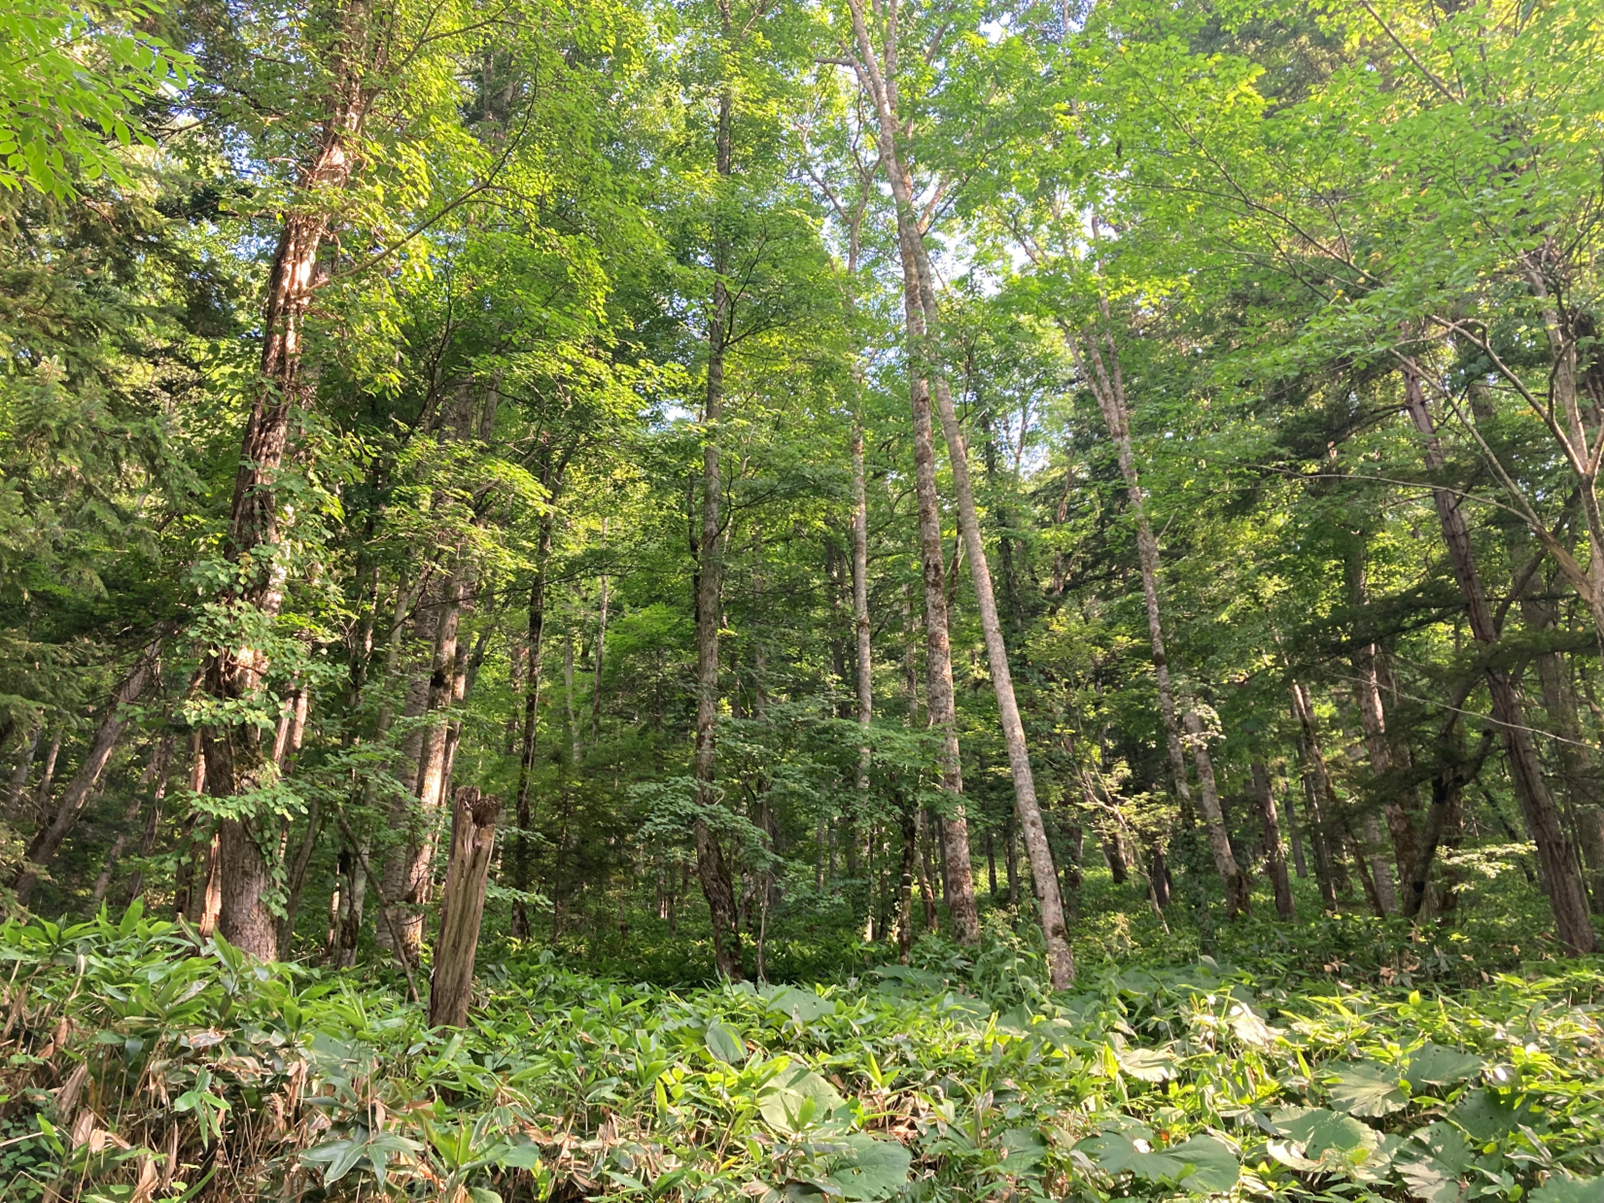 Photo of a typical mixed forest of coniferous trees and broad-leaved trees in Hokkaido (Photo by Junko Morimoto)